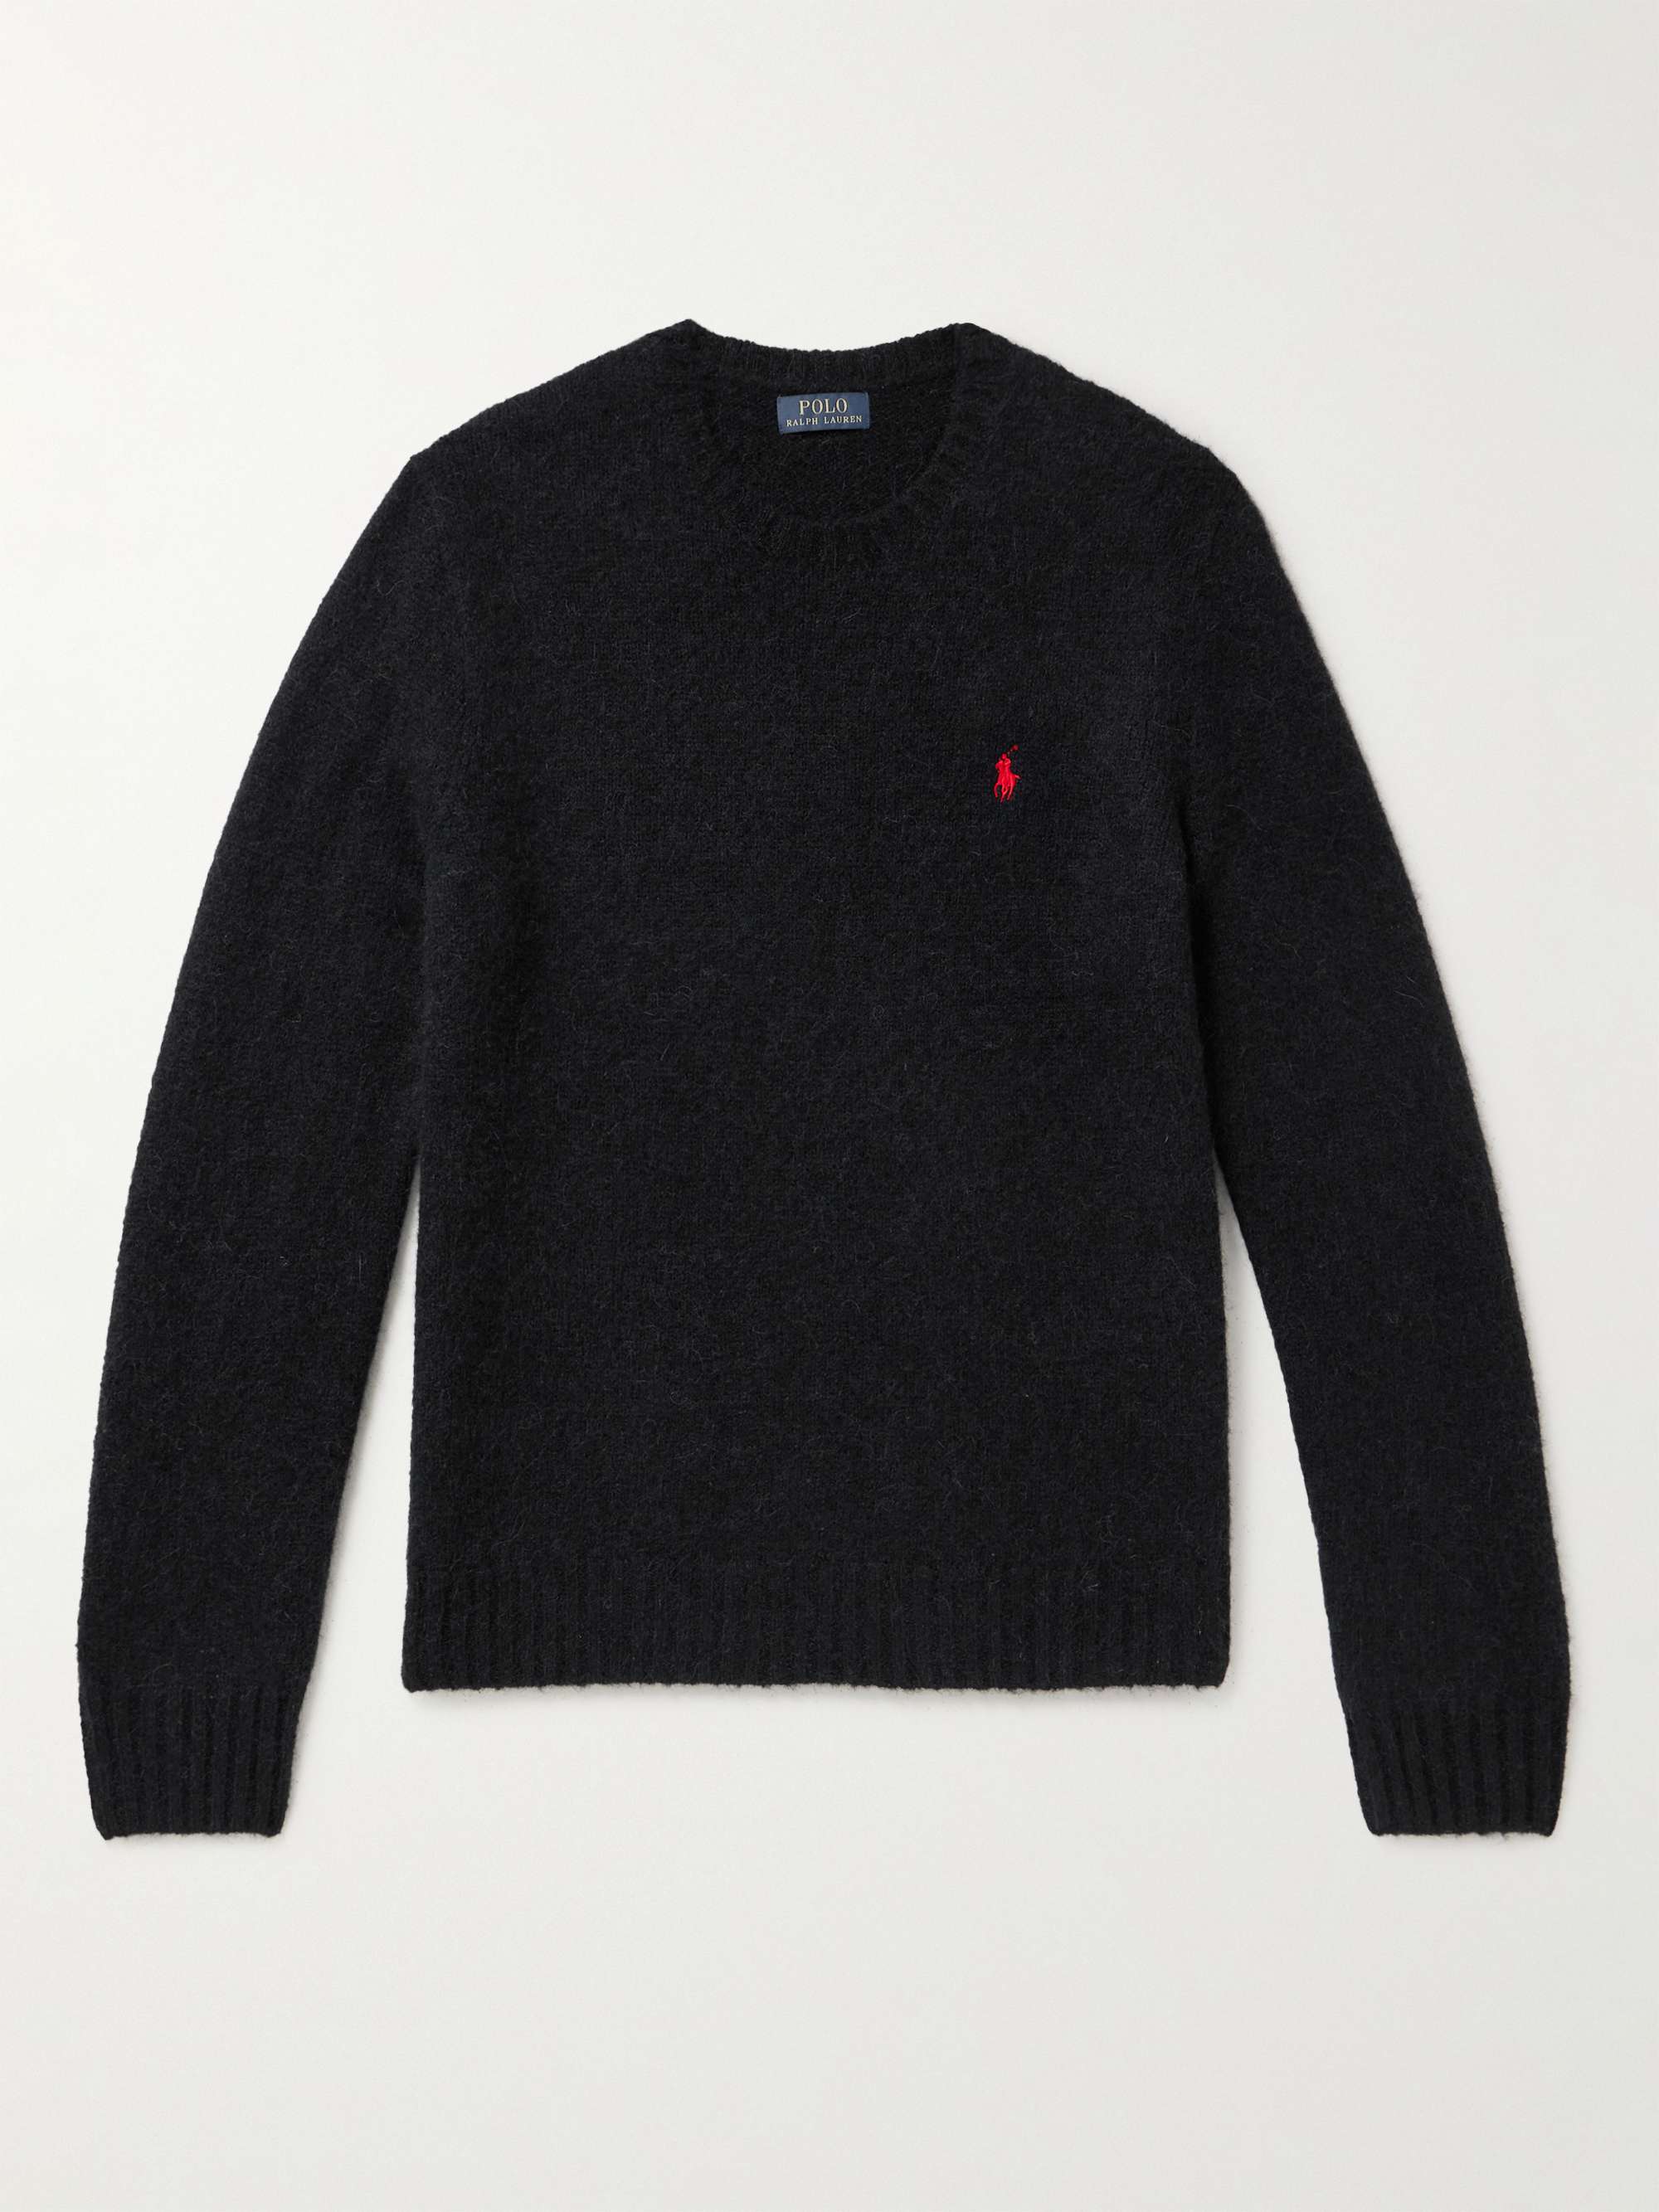 POLO RALPH LAUREN Logo-Embroidered Knitted Sweater,Black